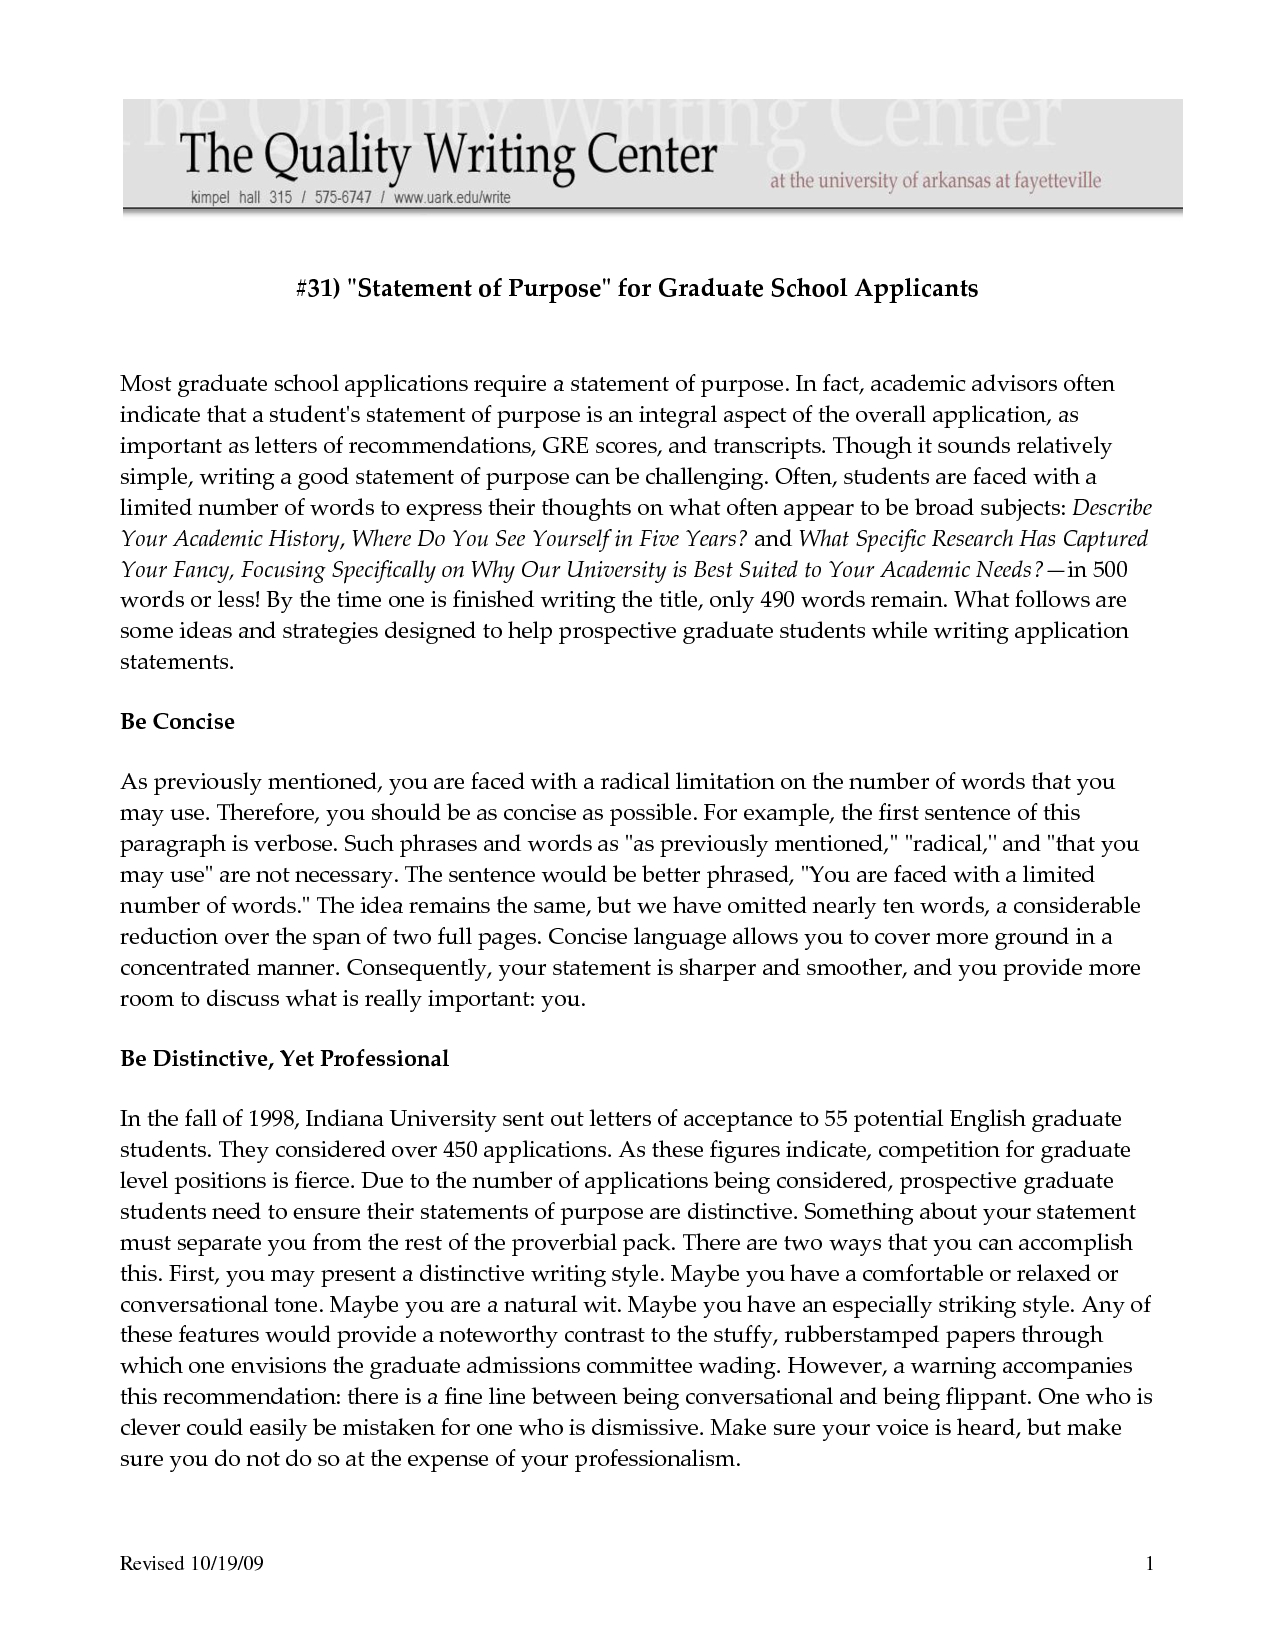 letter of intent for graduate school template Collection-Sample Personal Statements Graduate School 10-b